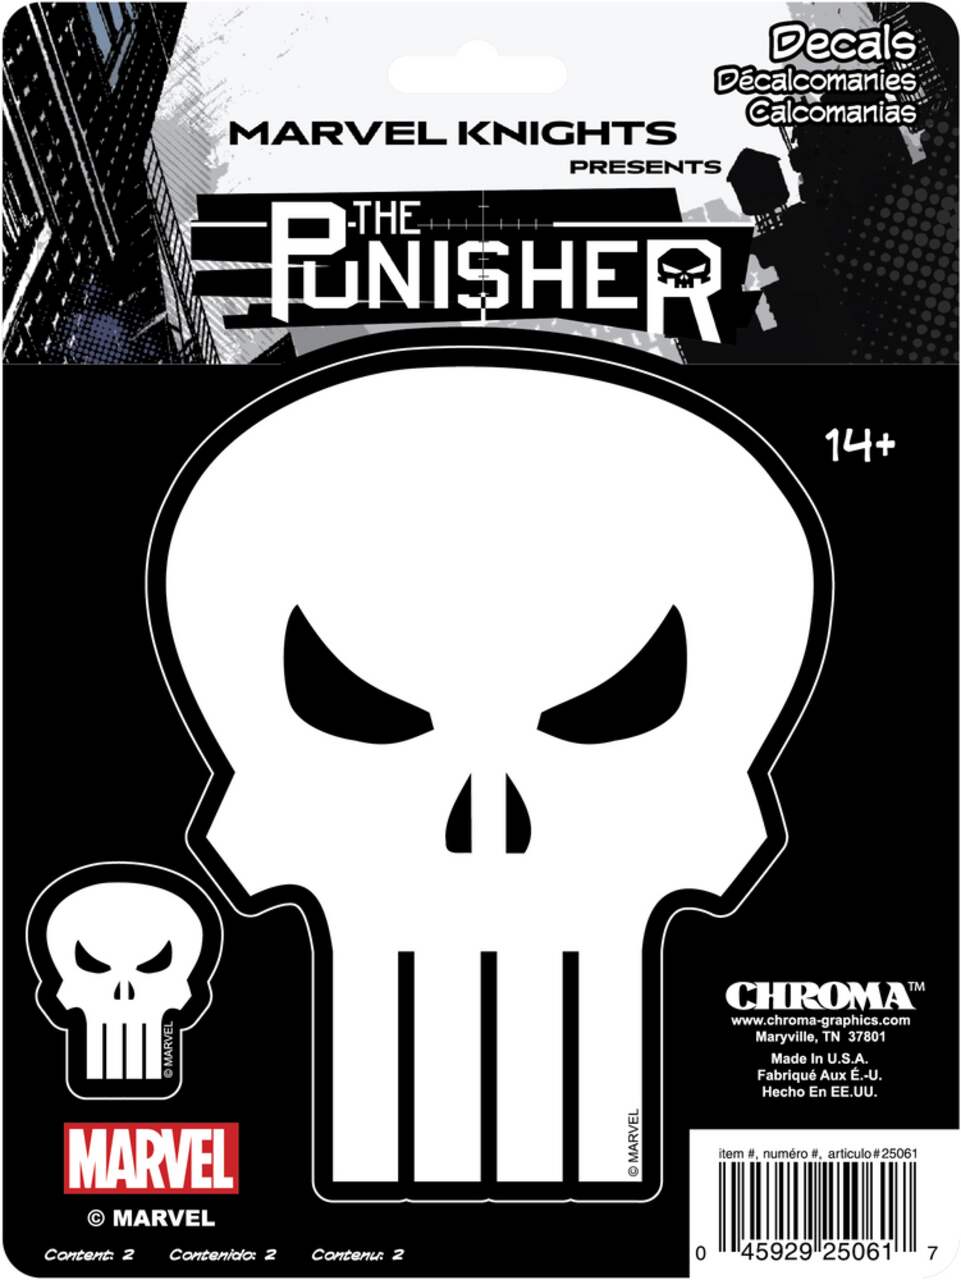 https://media-www.canadiantire.ca/product/automotive/car-care-accessories/auto-accessories/0372448/punisher-decal-0b6dae8d-c8ee-47b2-9d6b-dfb563fd01dc.png?imdensity=1&imwidth=640&impolicy=mZoom